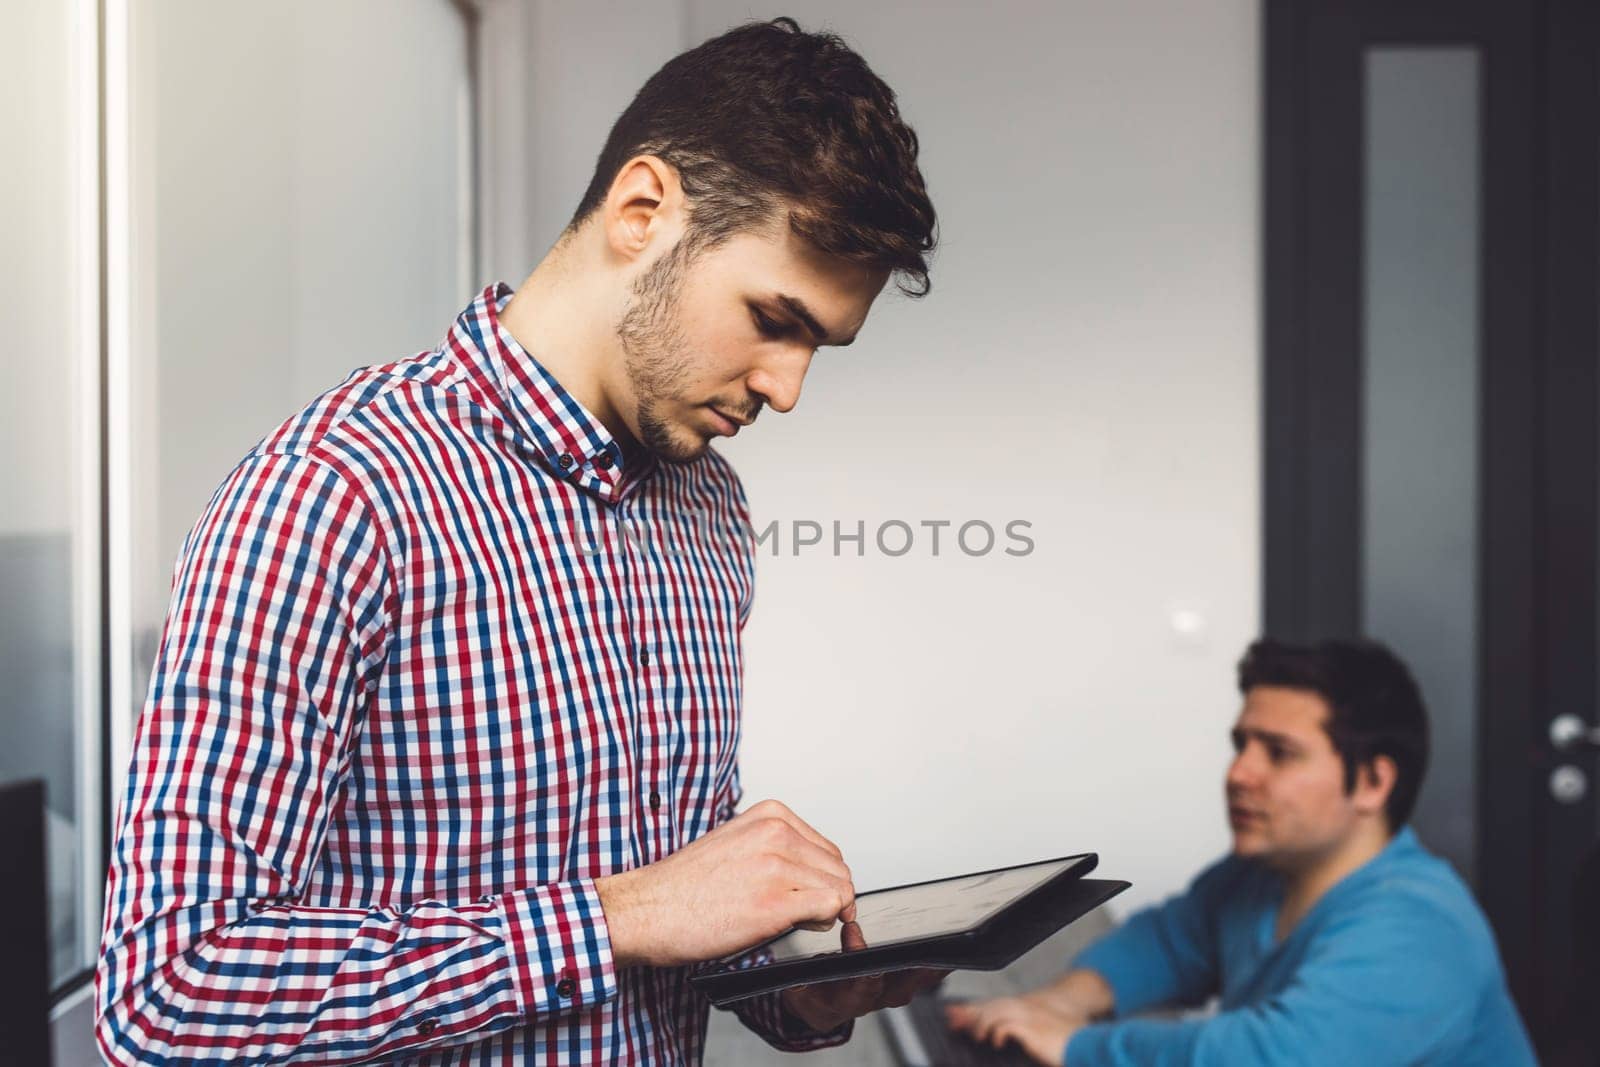 IT Programmer Working on Desktop Computer. Male Specialist Creating Innovative Software Engineer Developing App, Program, Video Game. Terminal with Coding Language. Over Shoulder. High quality photo